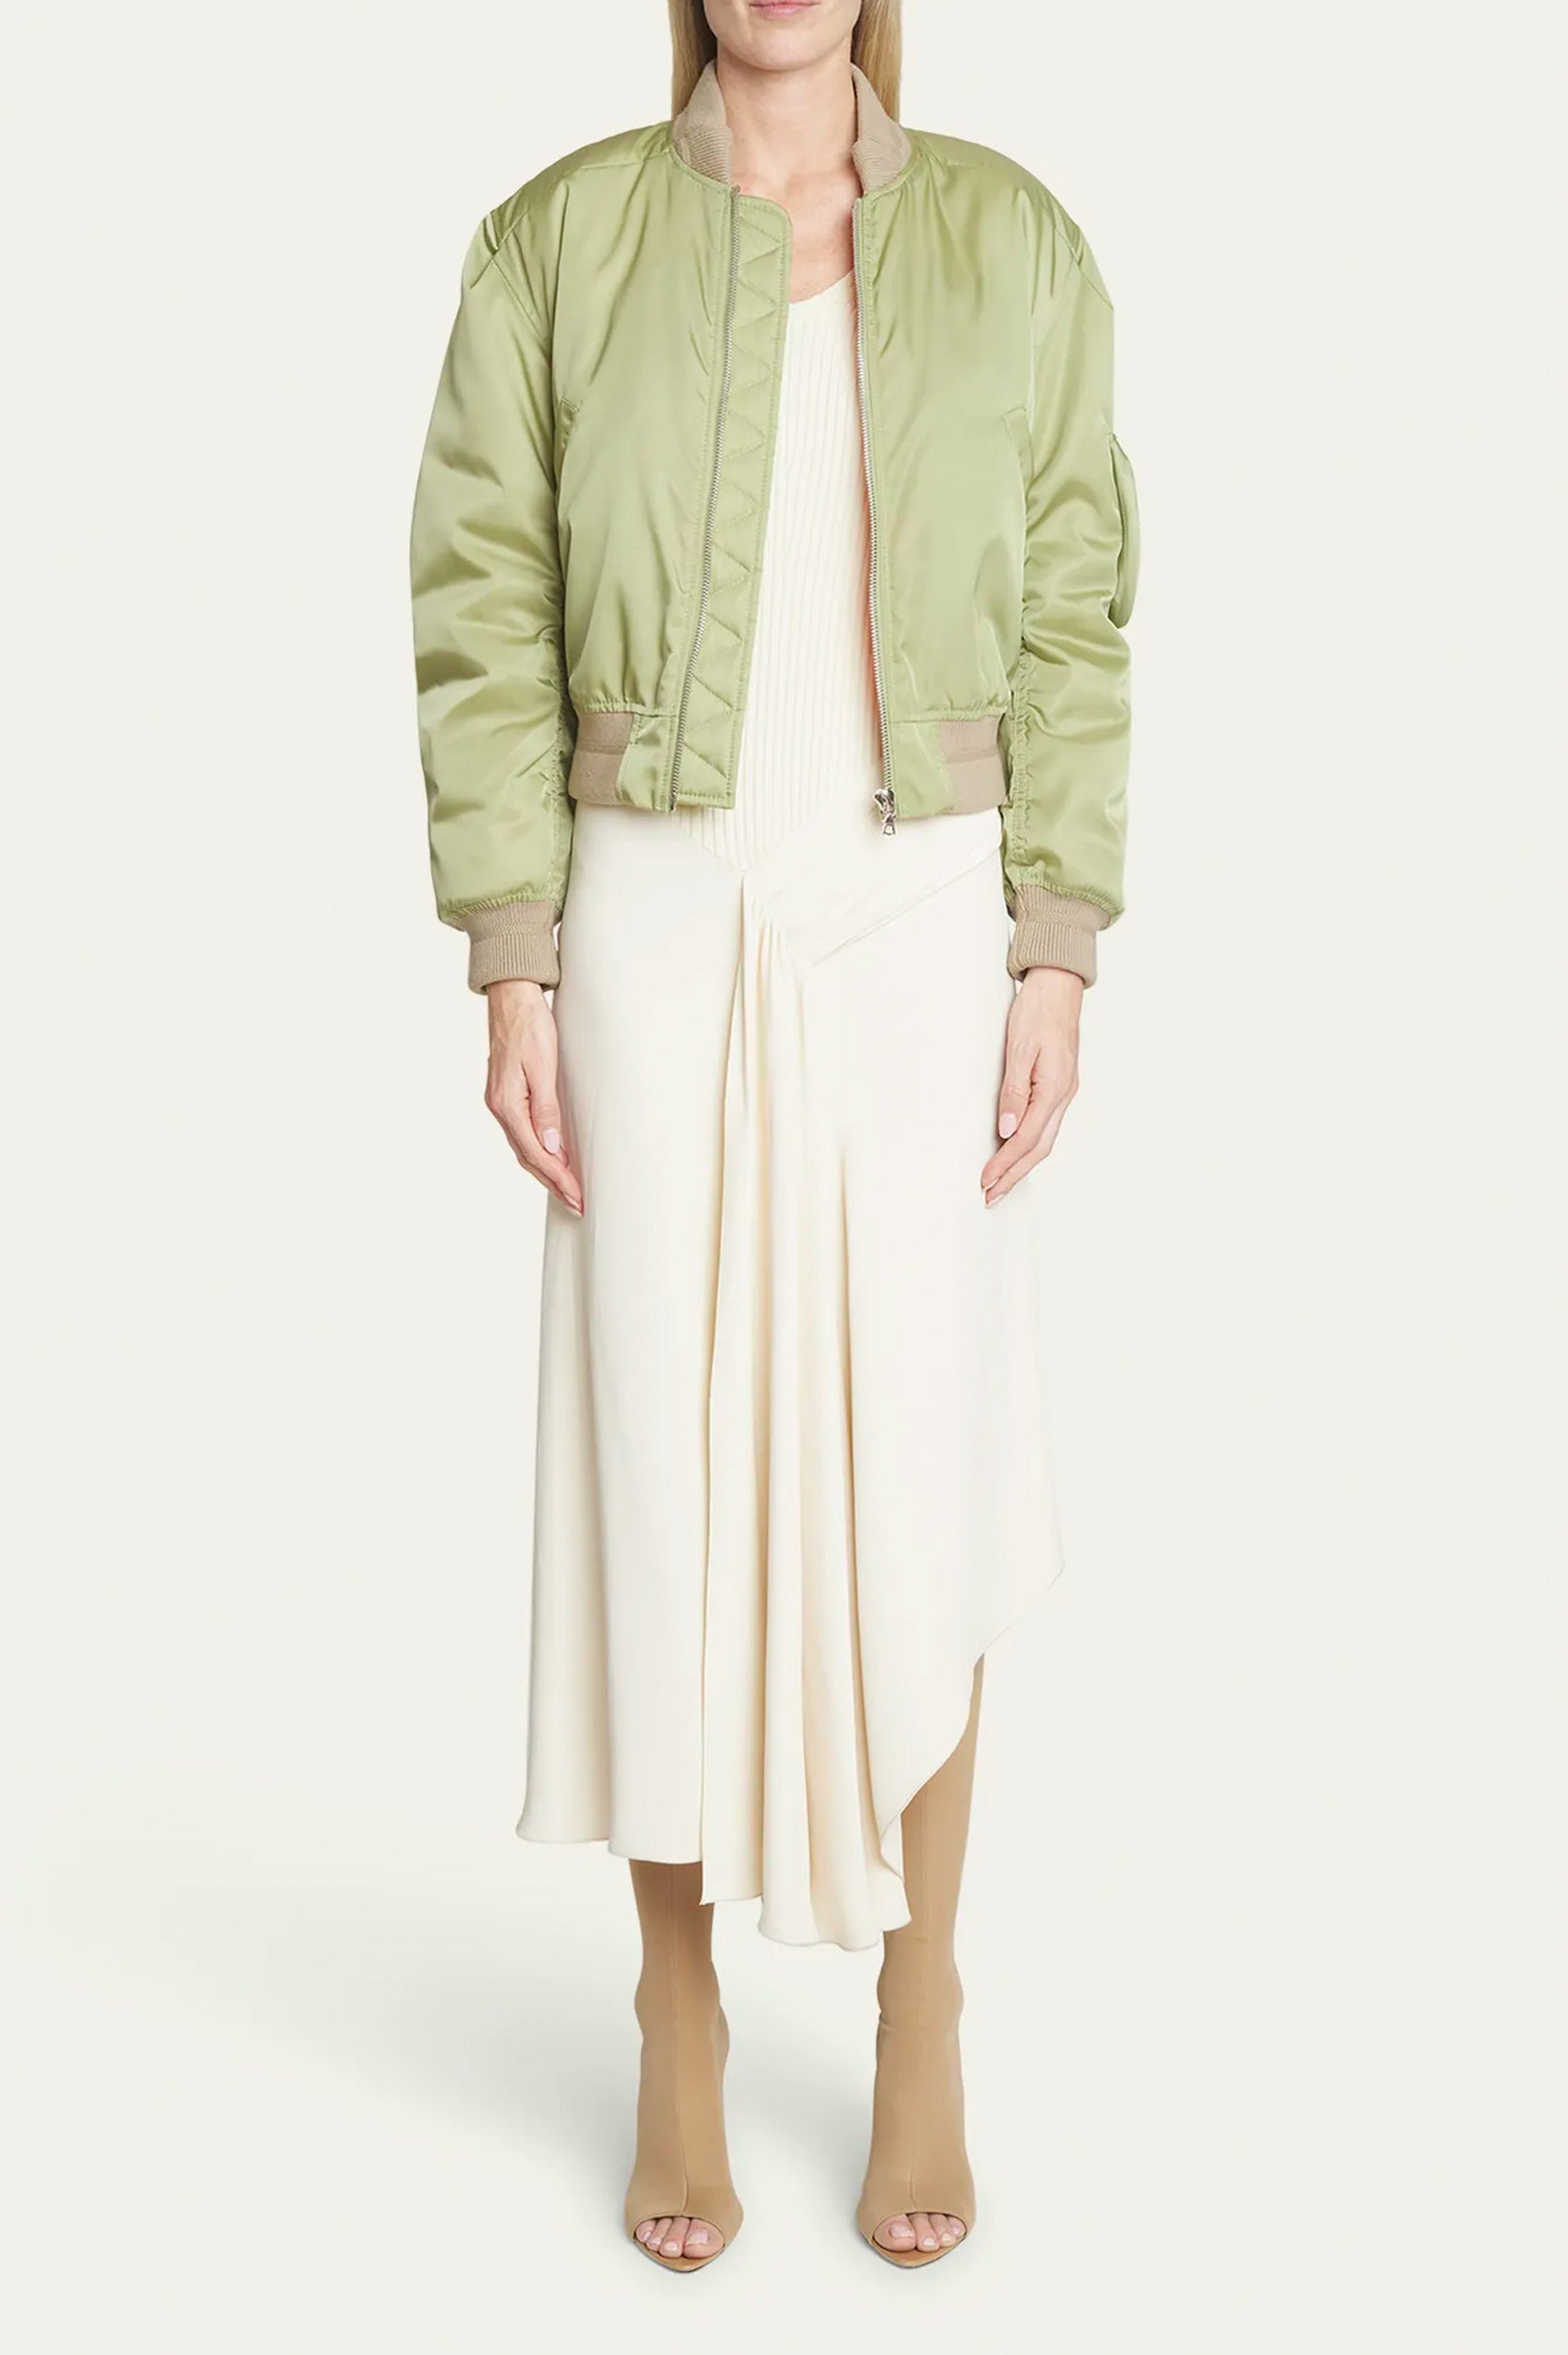 Cropped Bomber Jacket in Avacado